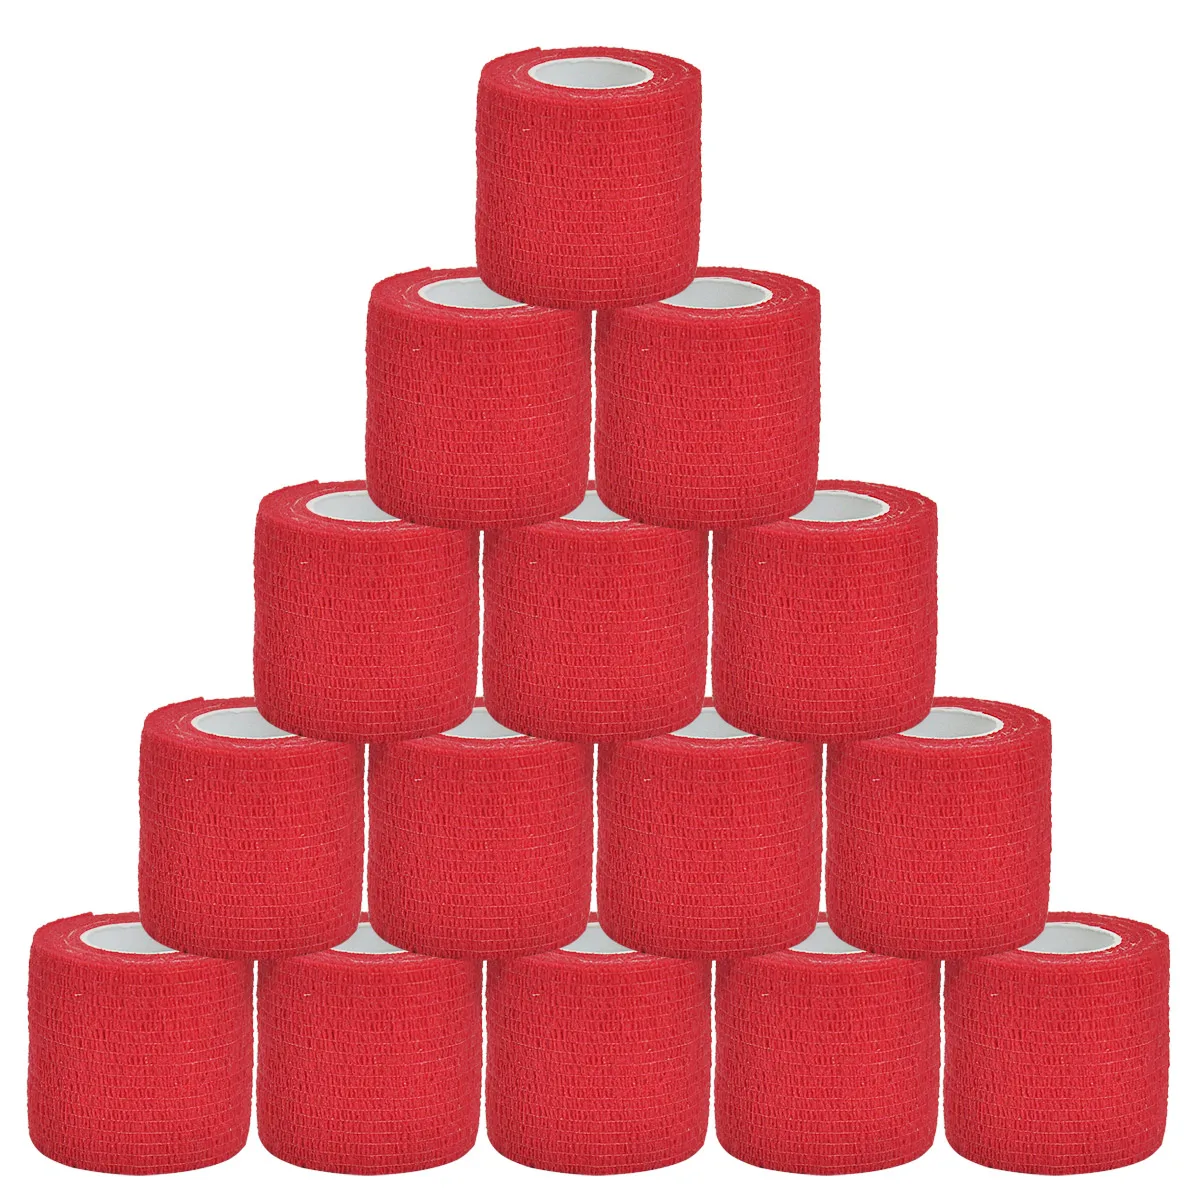 

Red sports Elastic Tattoo Grip Bandage Wraps Tapes Nonwoven Waterproof Self Adhesive Finger Protection Tattoo Accessories Raben